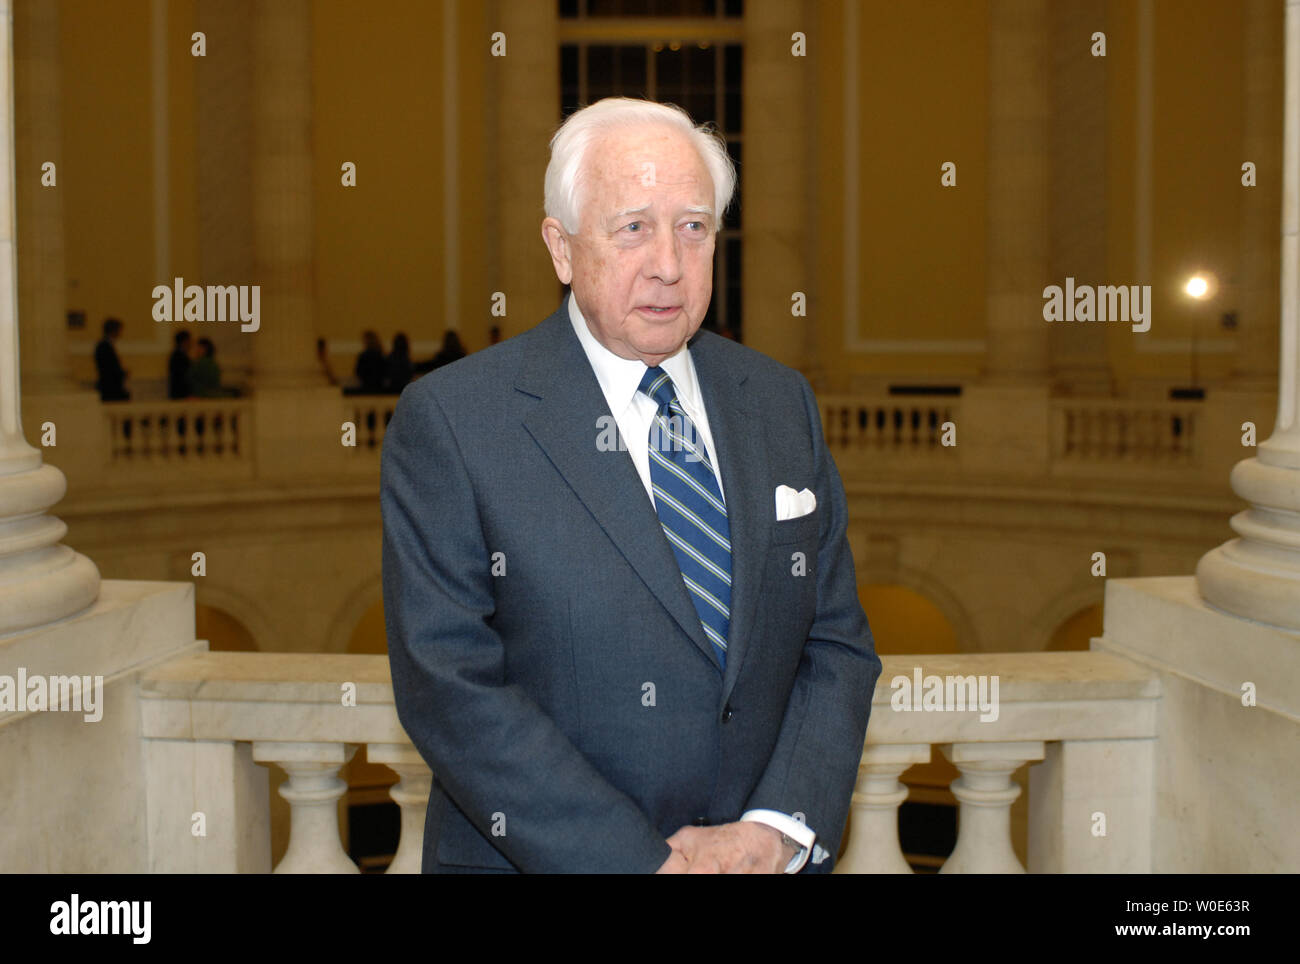 Author of the Pulitzer Prize winning book 'John Adams' David McCullough arrives before a screening of part of the HBO miniseries based on McCullough's book at the Cannon Building on Capitol Hill in Washington on March 5, 2008. (UPI Photo/Alexis C. Glenn) Stock Photo